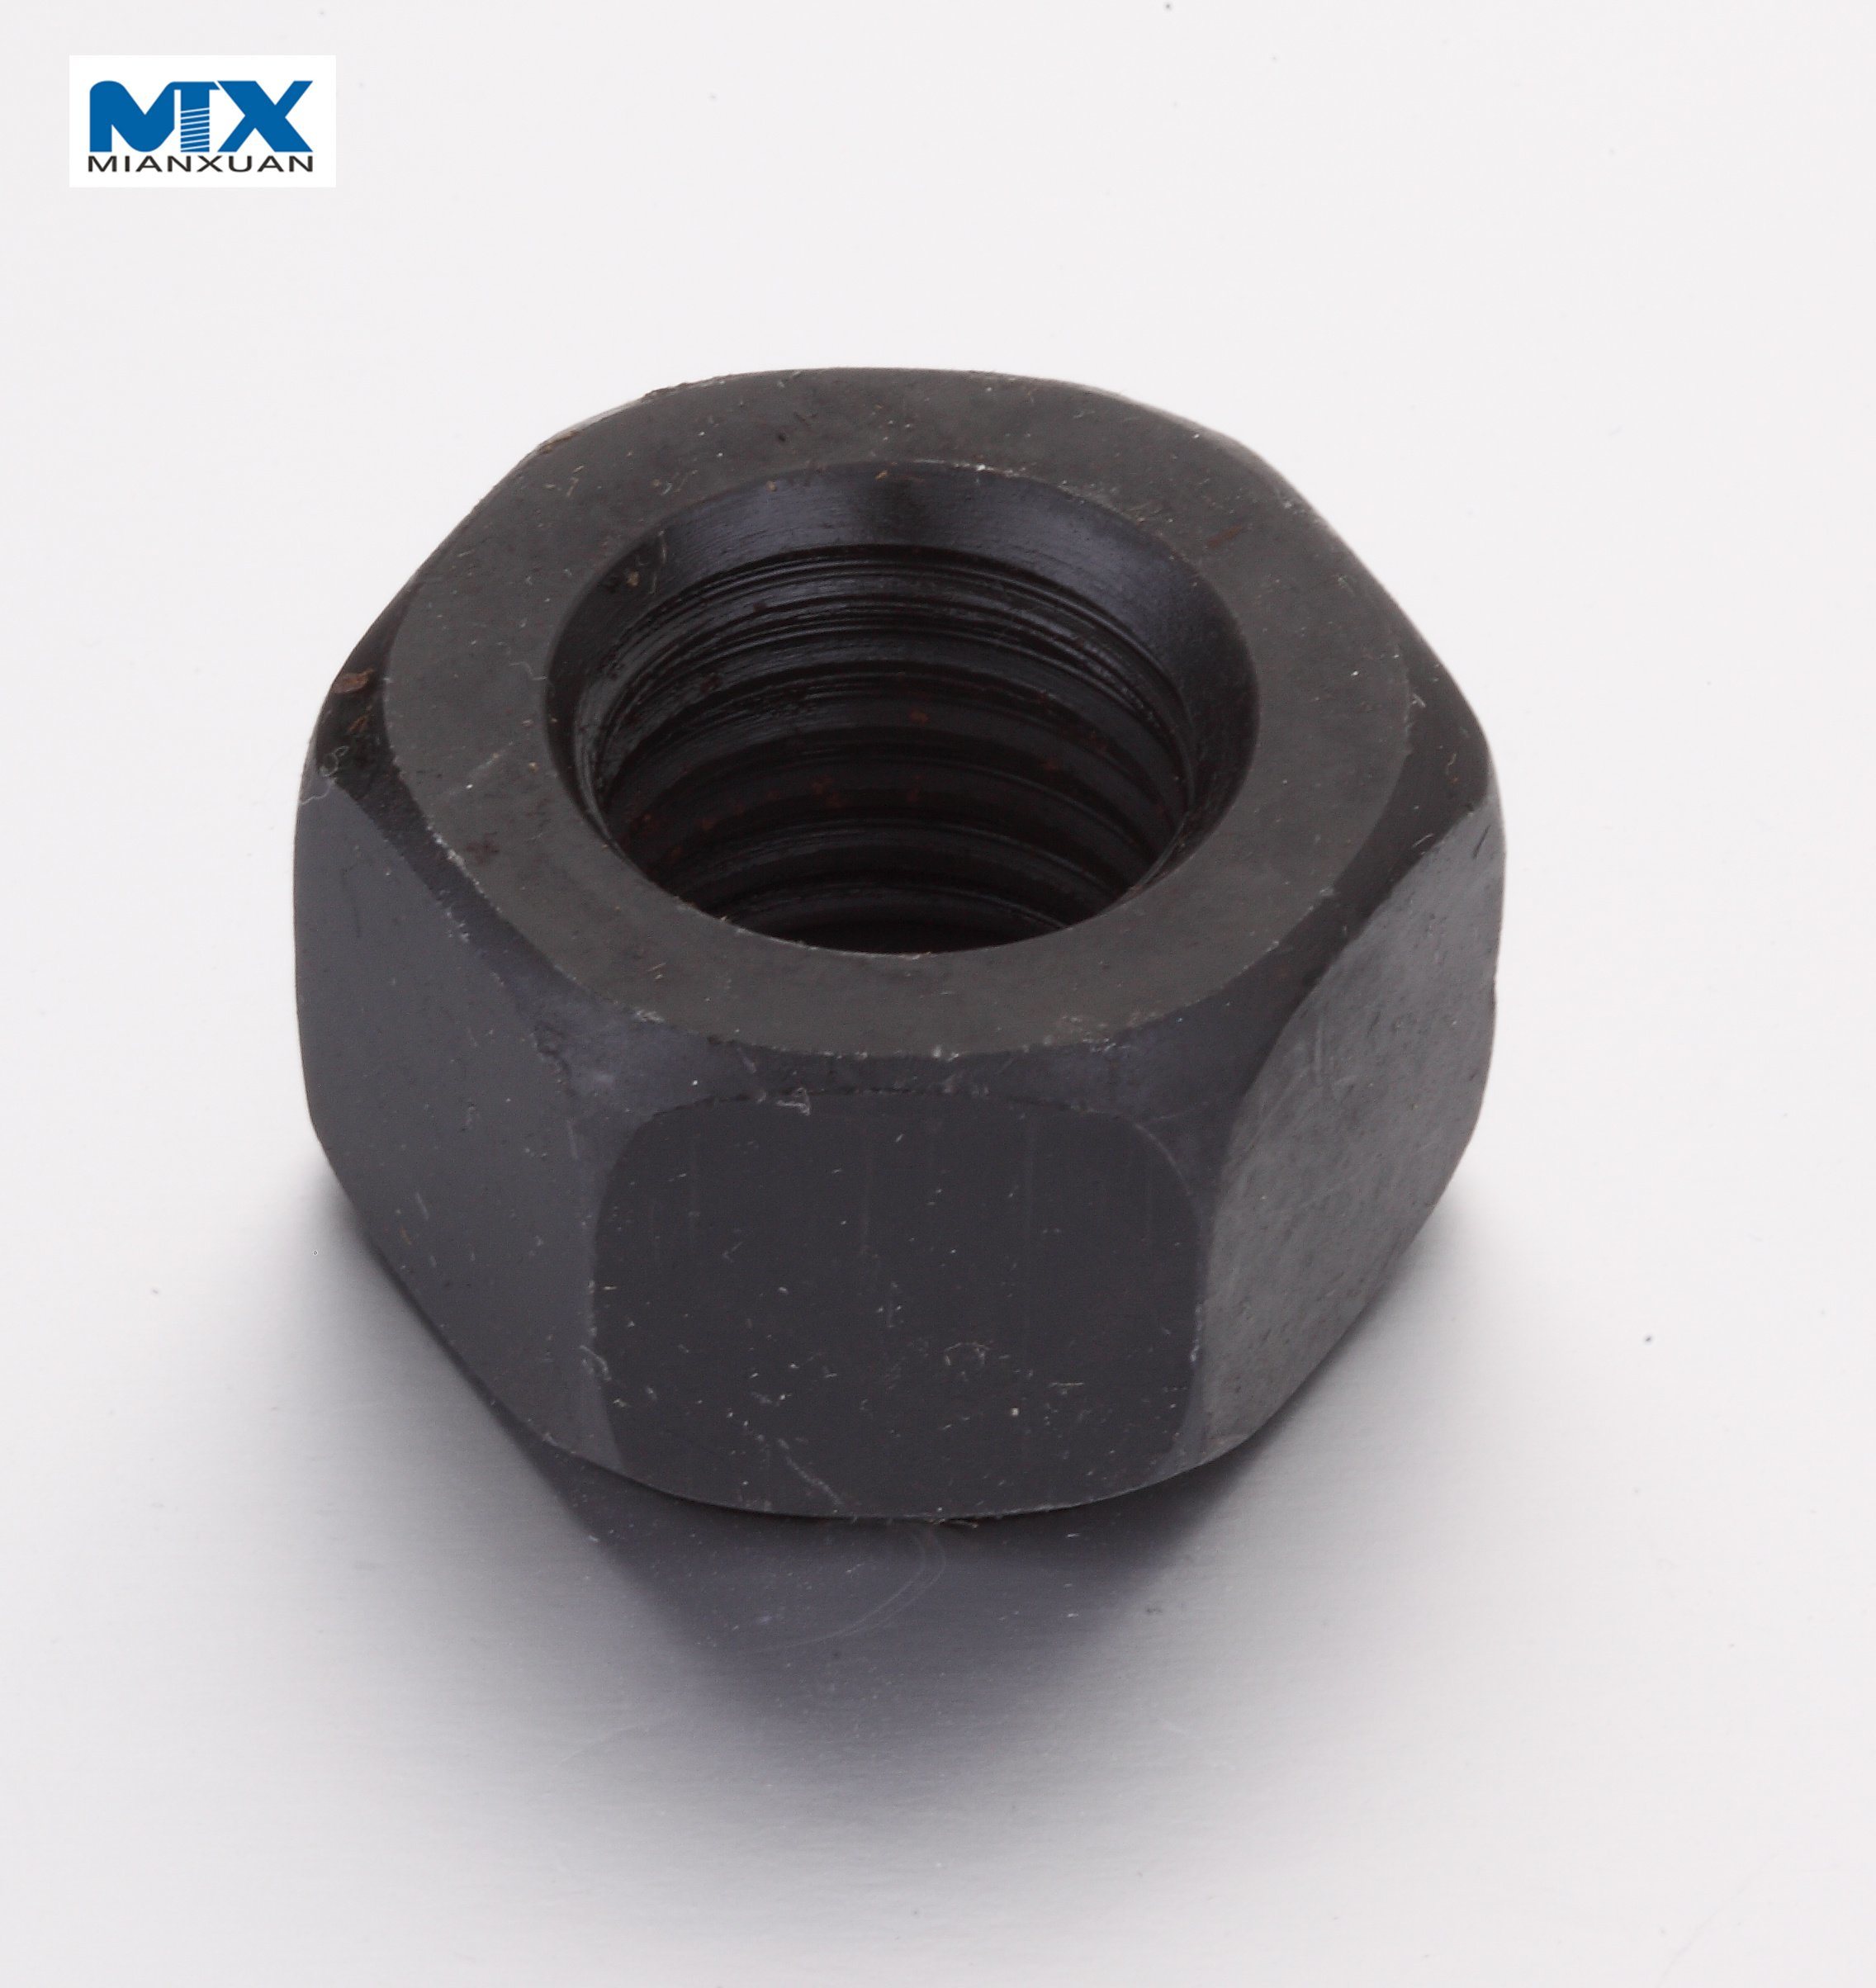 ANSI ASME Hex Nuts for Construction